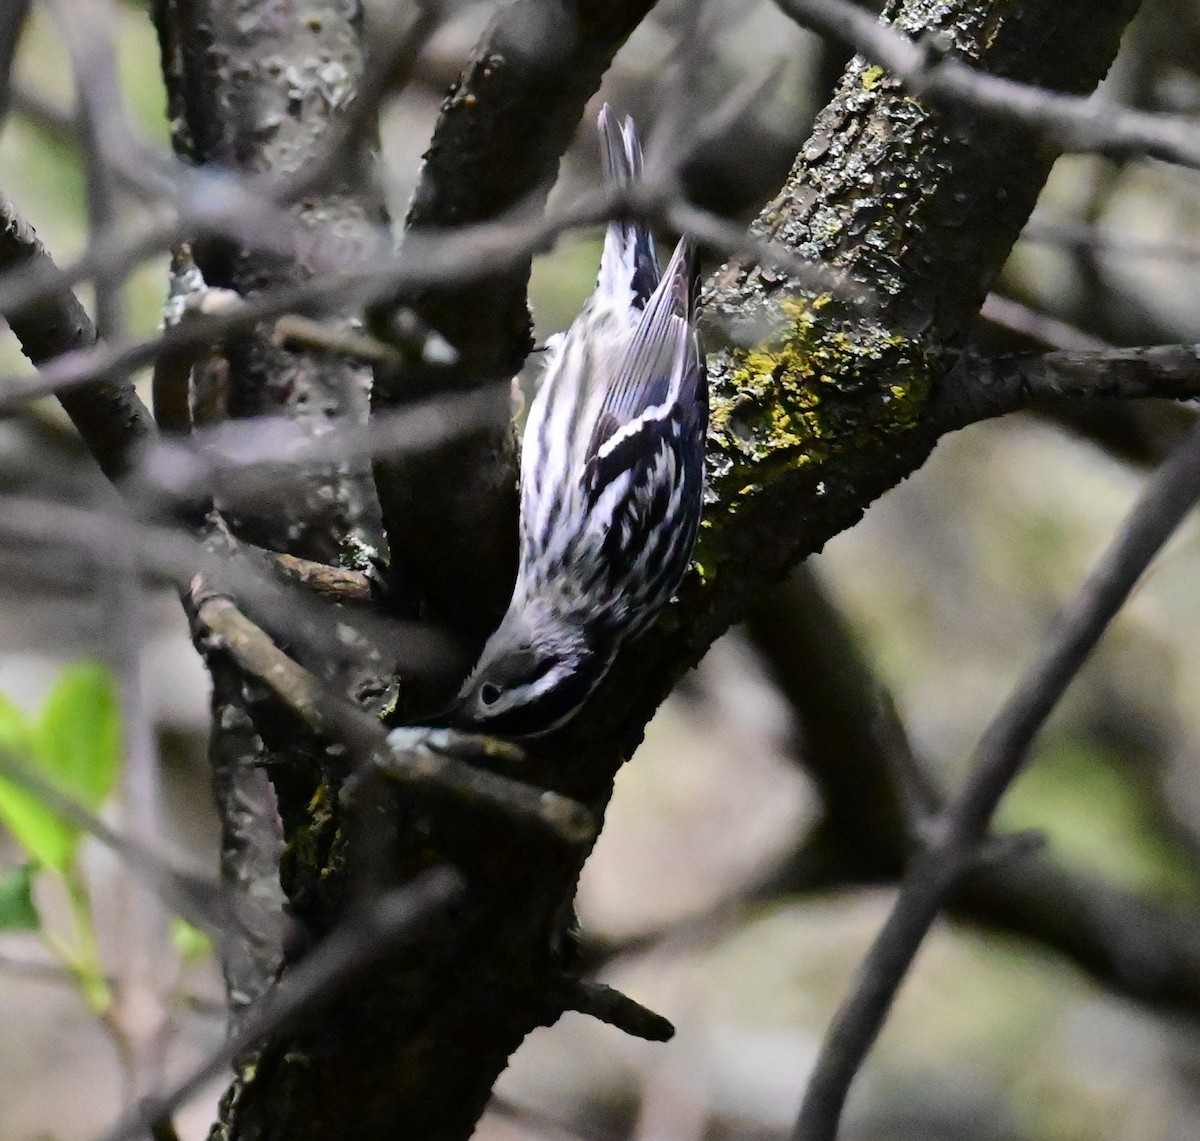 Black-and-white Warbler - Nicolle and H-Boon Lee